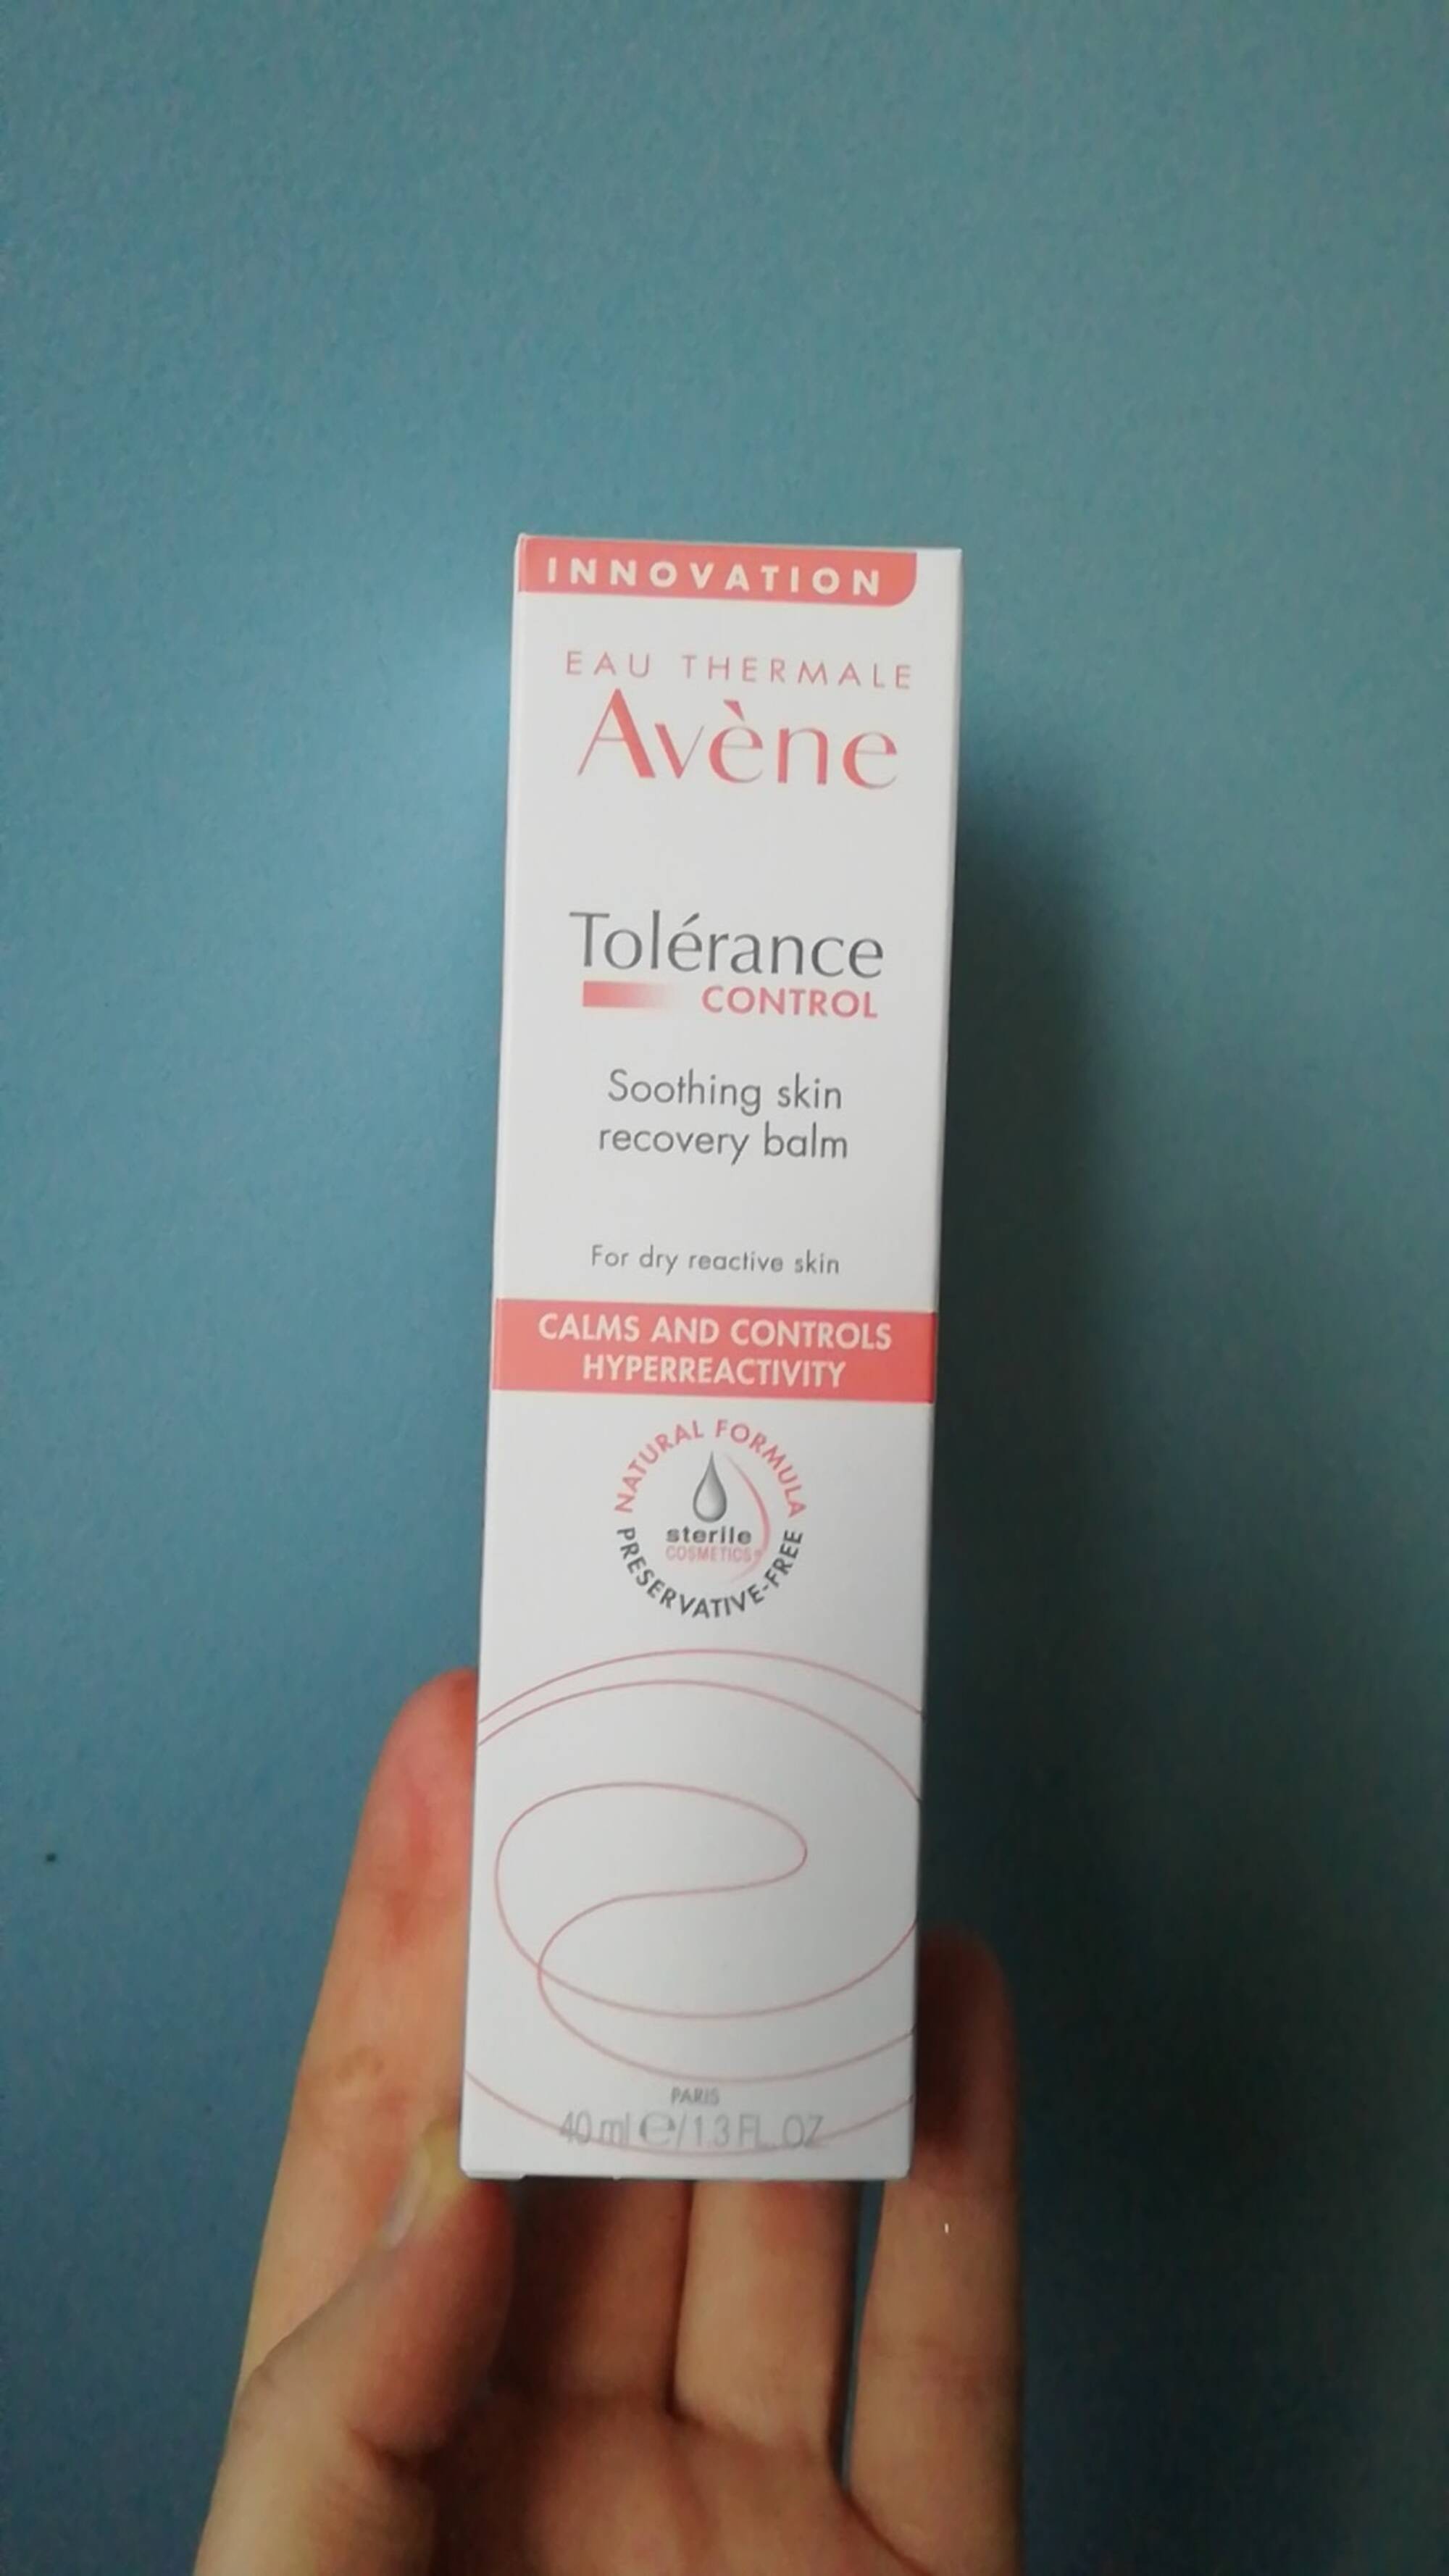 AVÈNE - Tolérance control - Soothing skin recovery balm